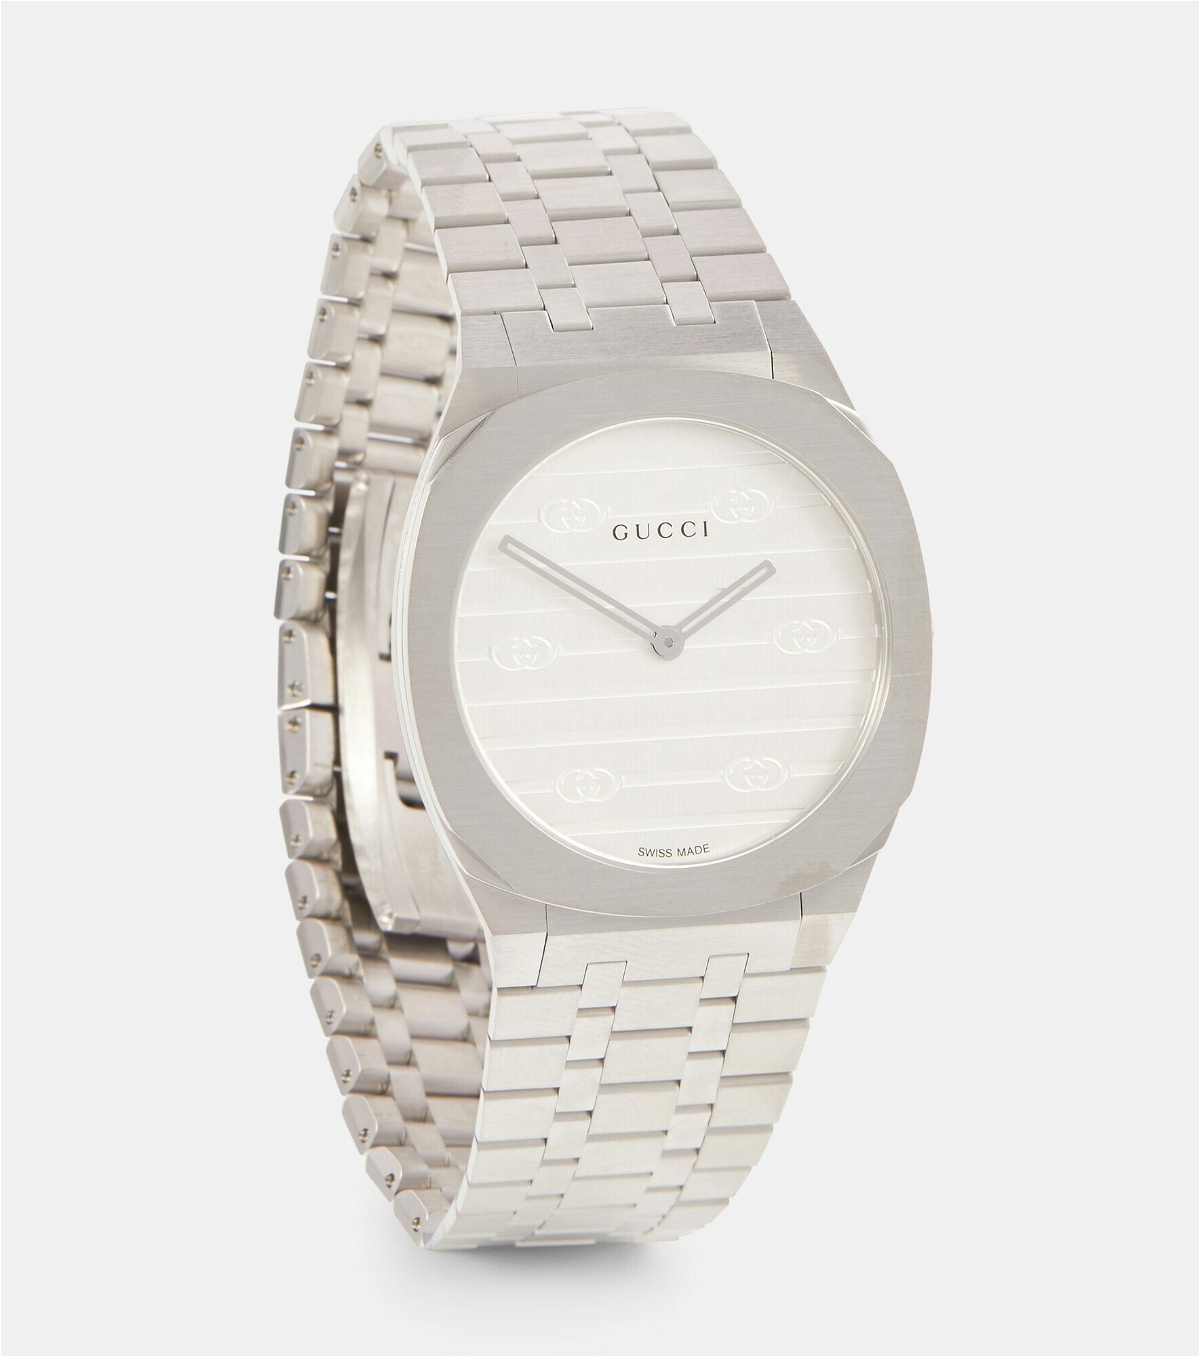 Gucci - 25H 30mm stainless steel watch Gucci